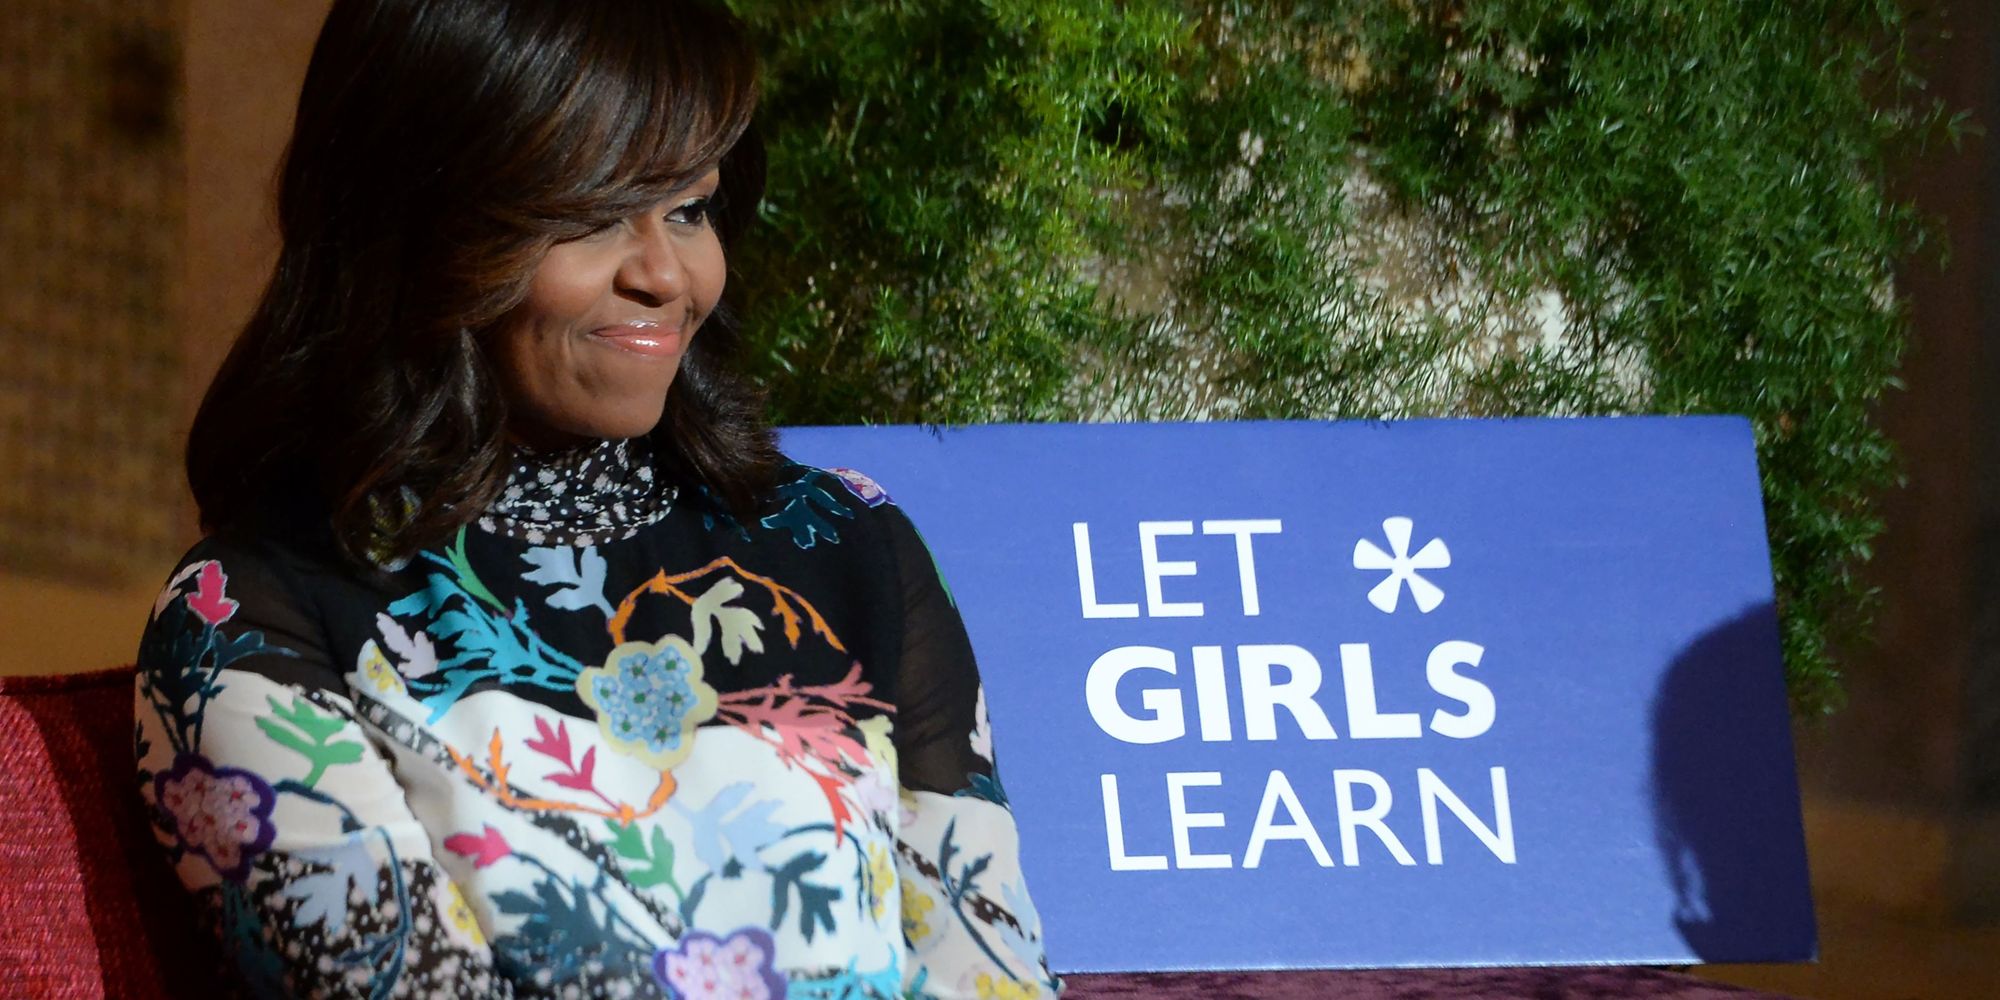 Michelle Obama Pledges $100 Million For Girls' Education In Morocco | The Huffington Post2000 x 1000